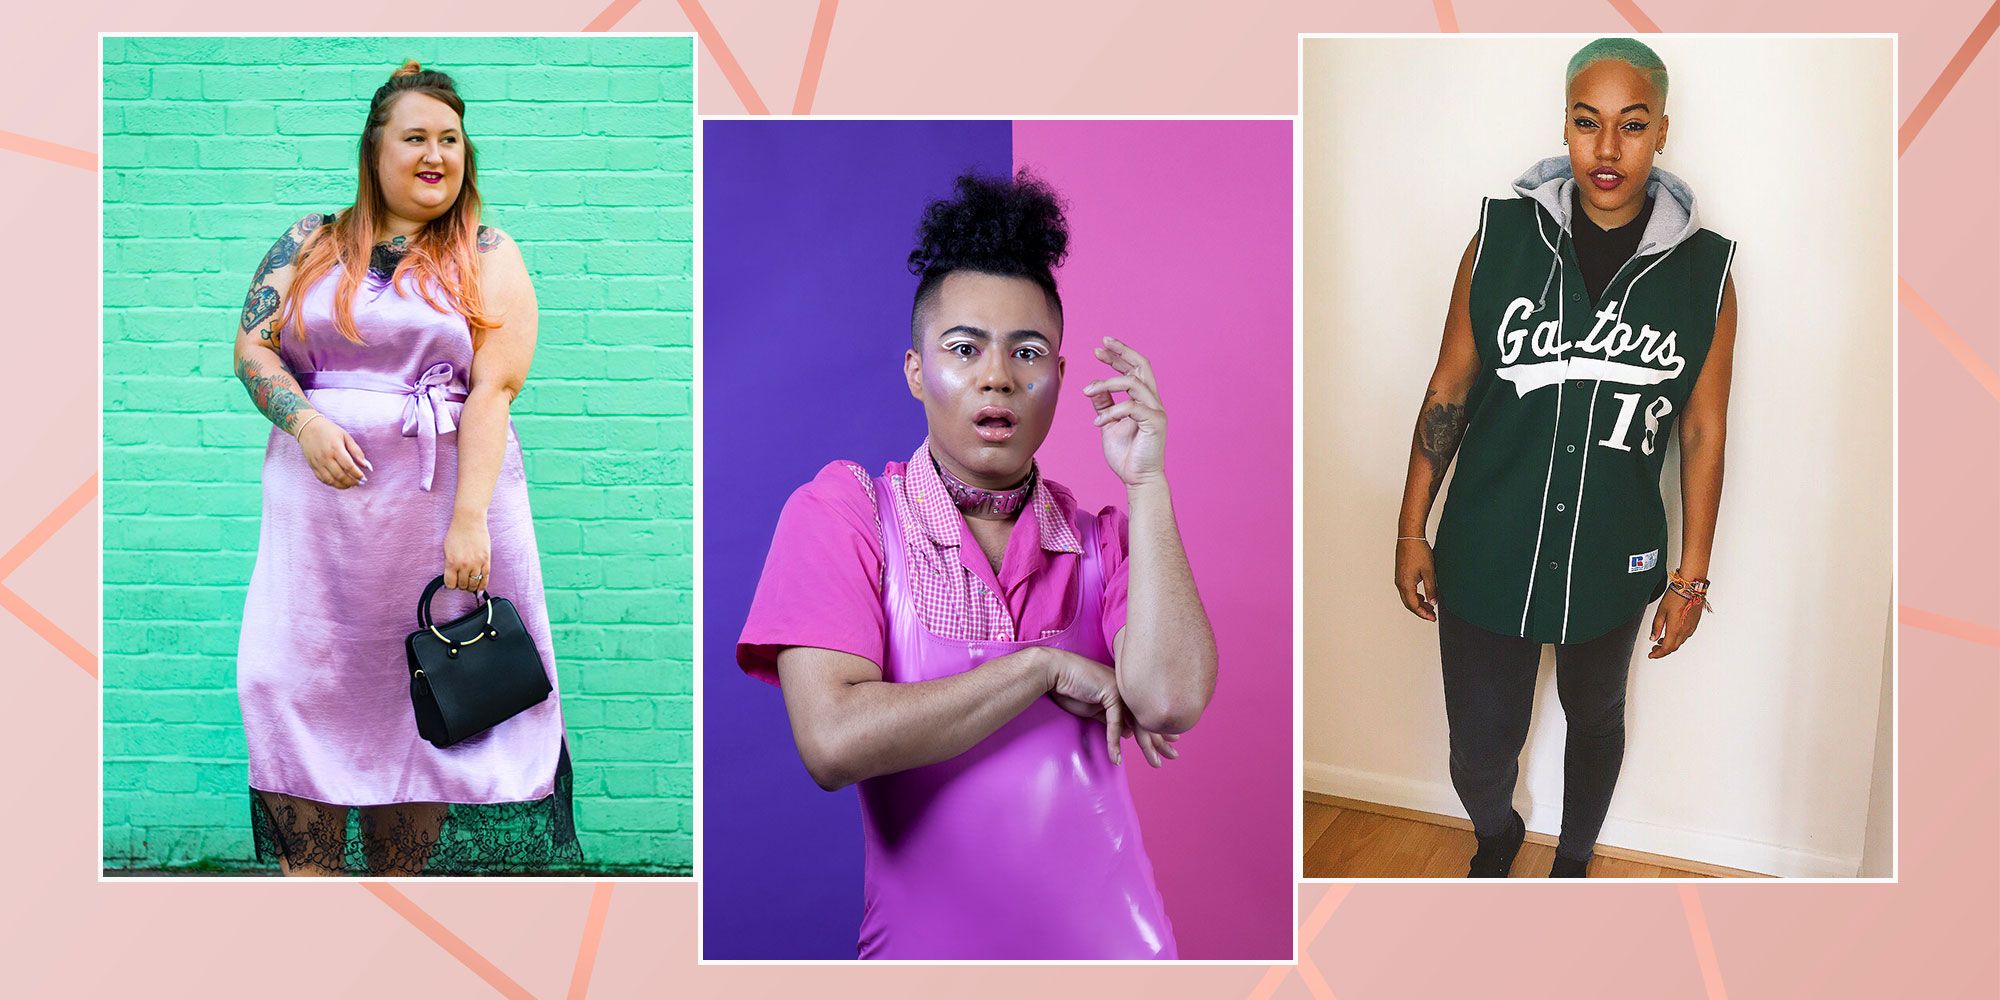 13 coming out stories from LGBTQ+ women and non-binary people